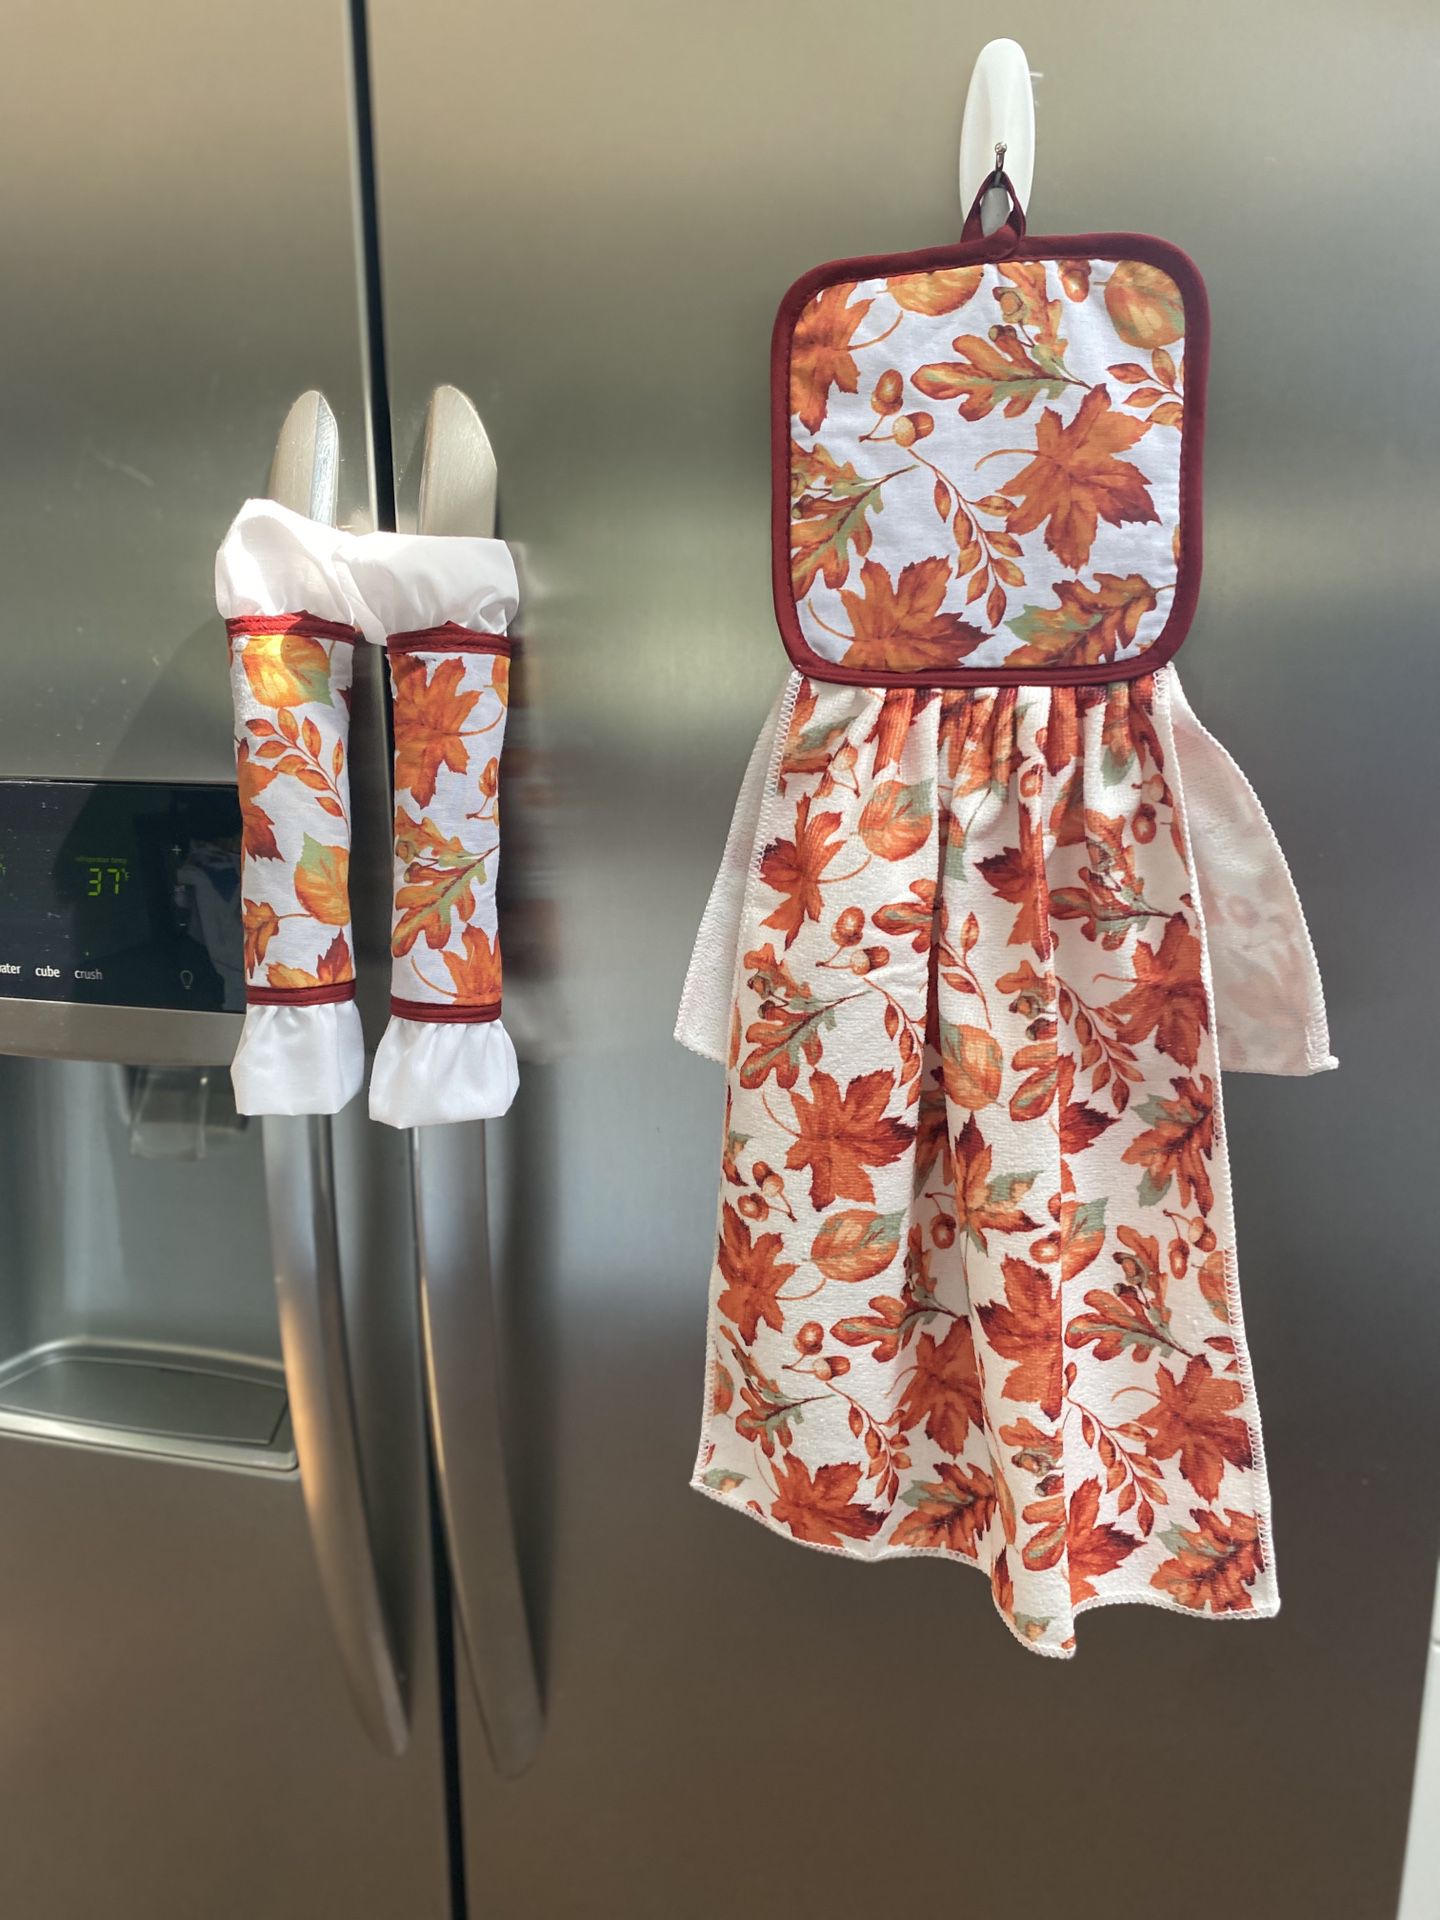 Kitchen towel with decorative pot holders